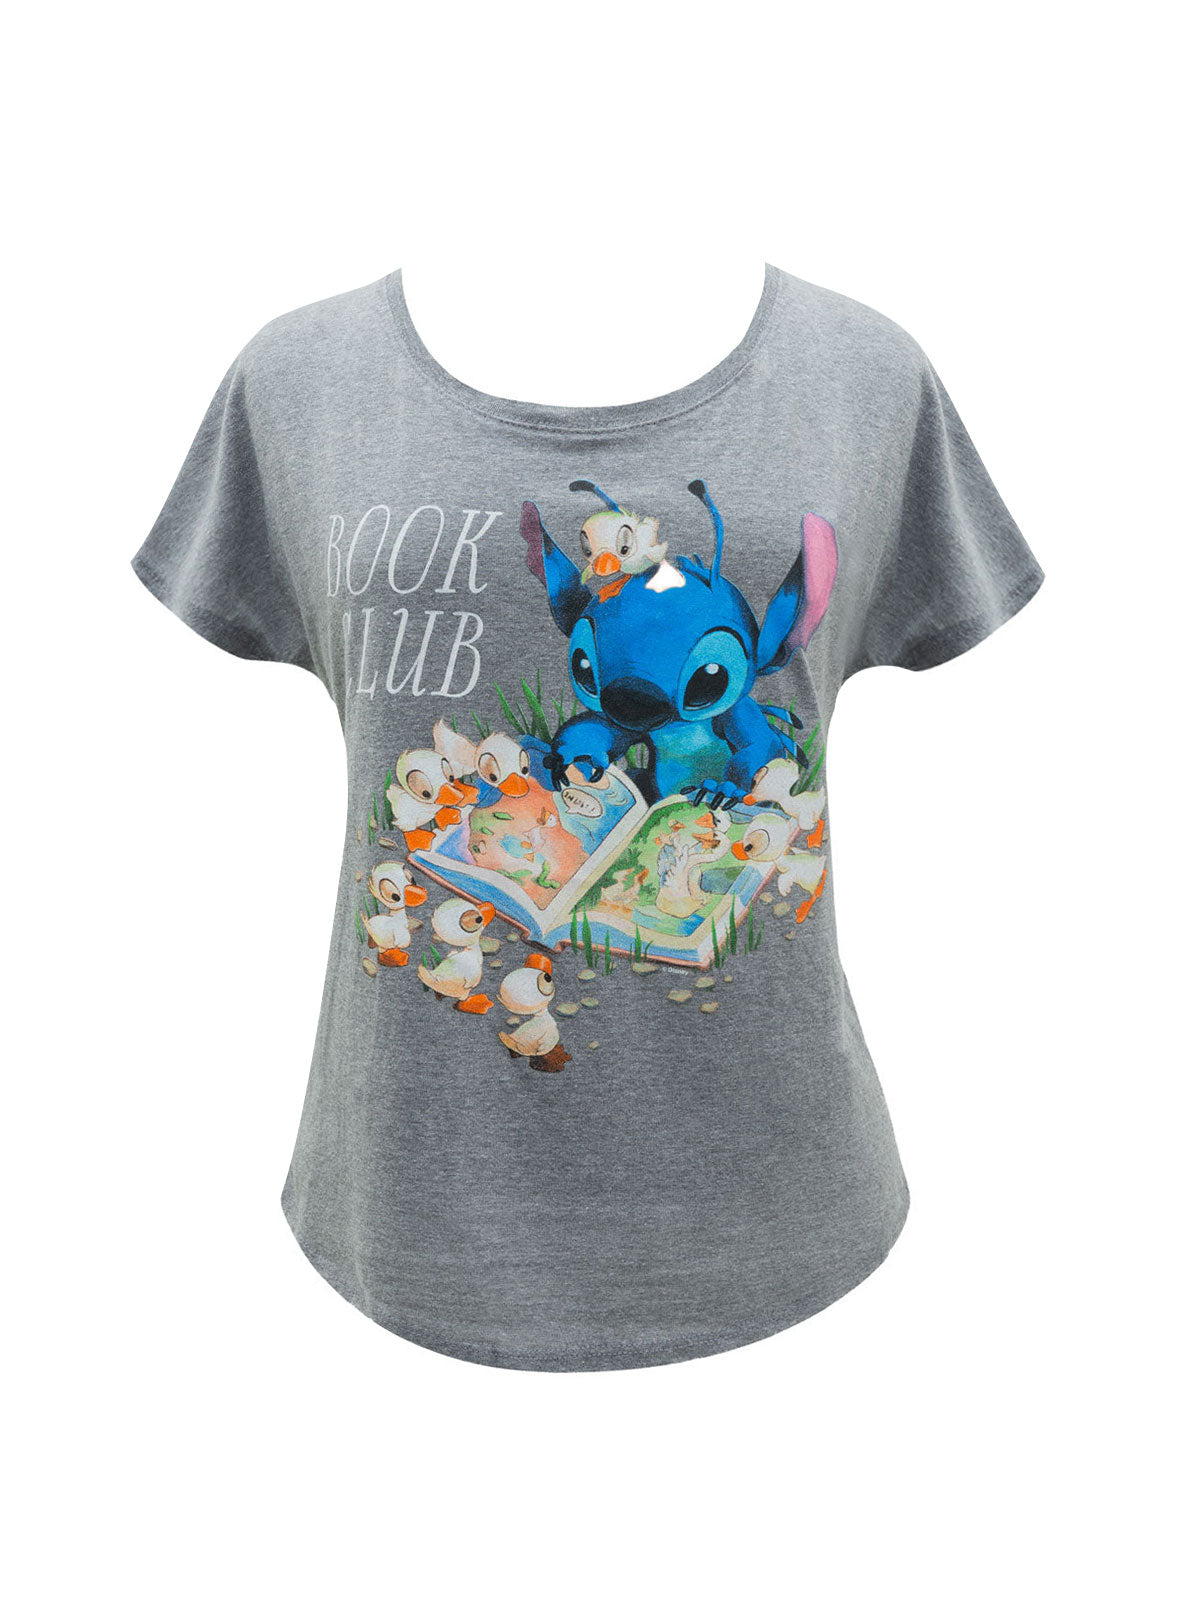 Disney Stitch Book Club women's relaxed fit t-shirt — Out of Print